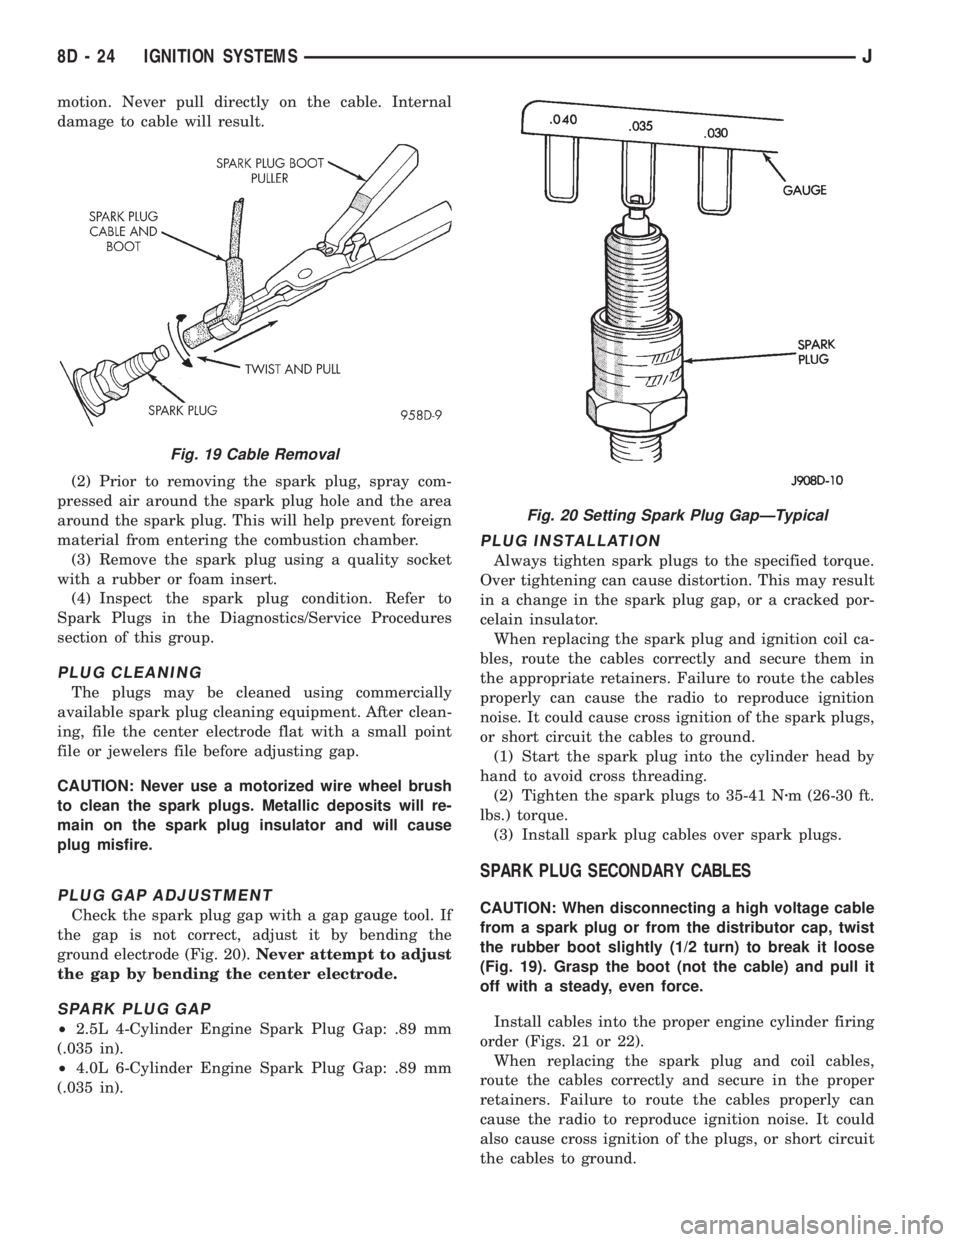 JEEP CHEROKEE 1995  Service Repair Manual motion. Never pull directly on the cable. Internal
damage to cable will result.
(2) Prior to removing the spark plug, spray com-
pressed air around the spark plug hole and the area
around the spark pl